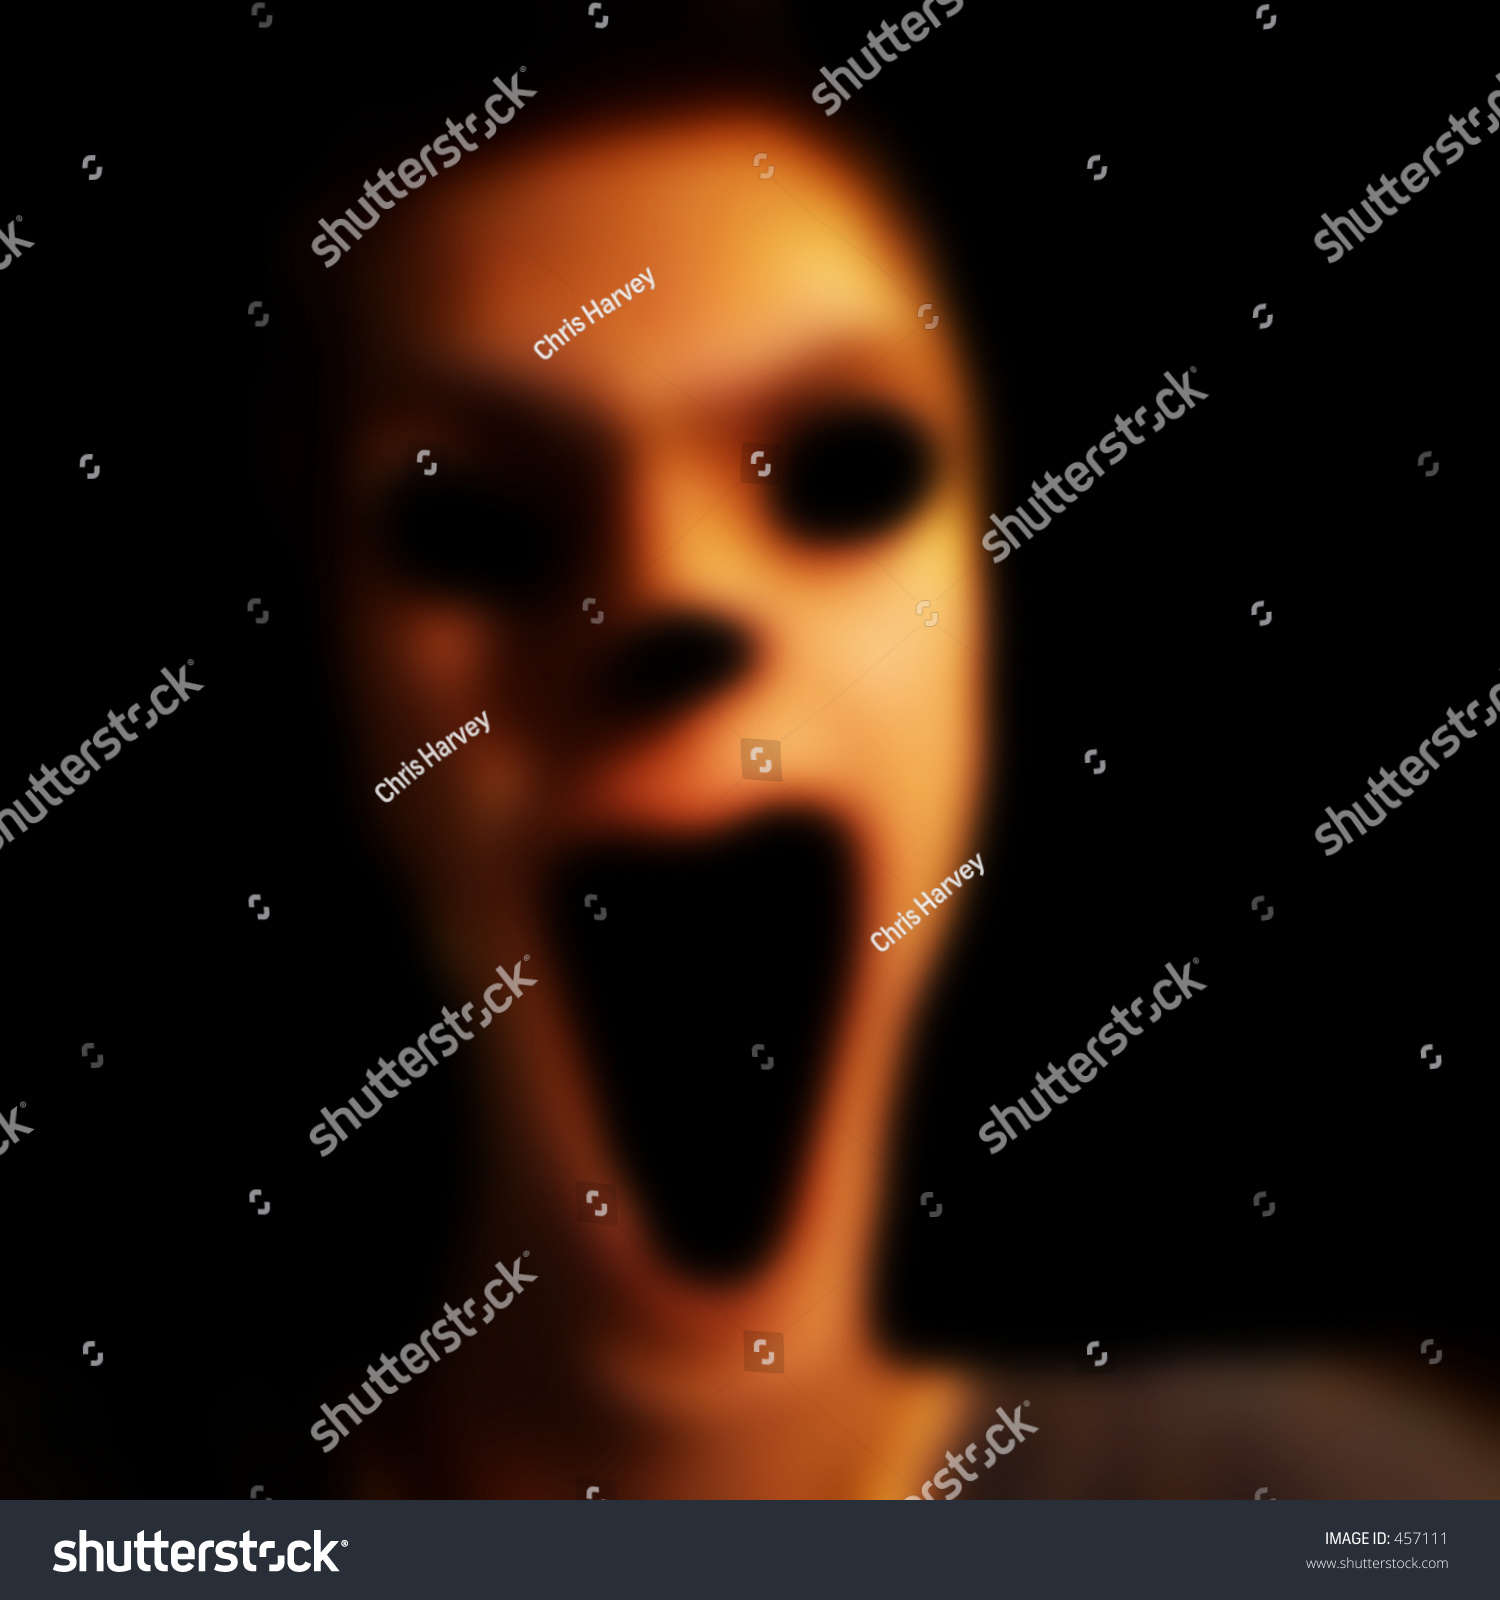 This Is A Spooky Ghost Like Face. Stock Photo 457111 : Shutterstock